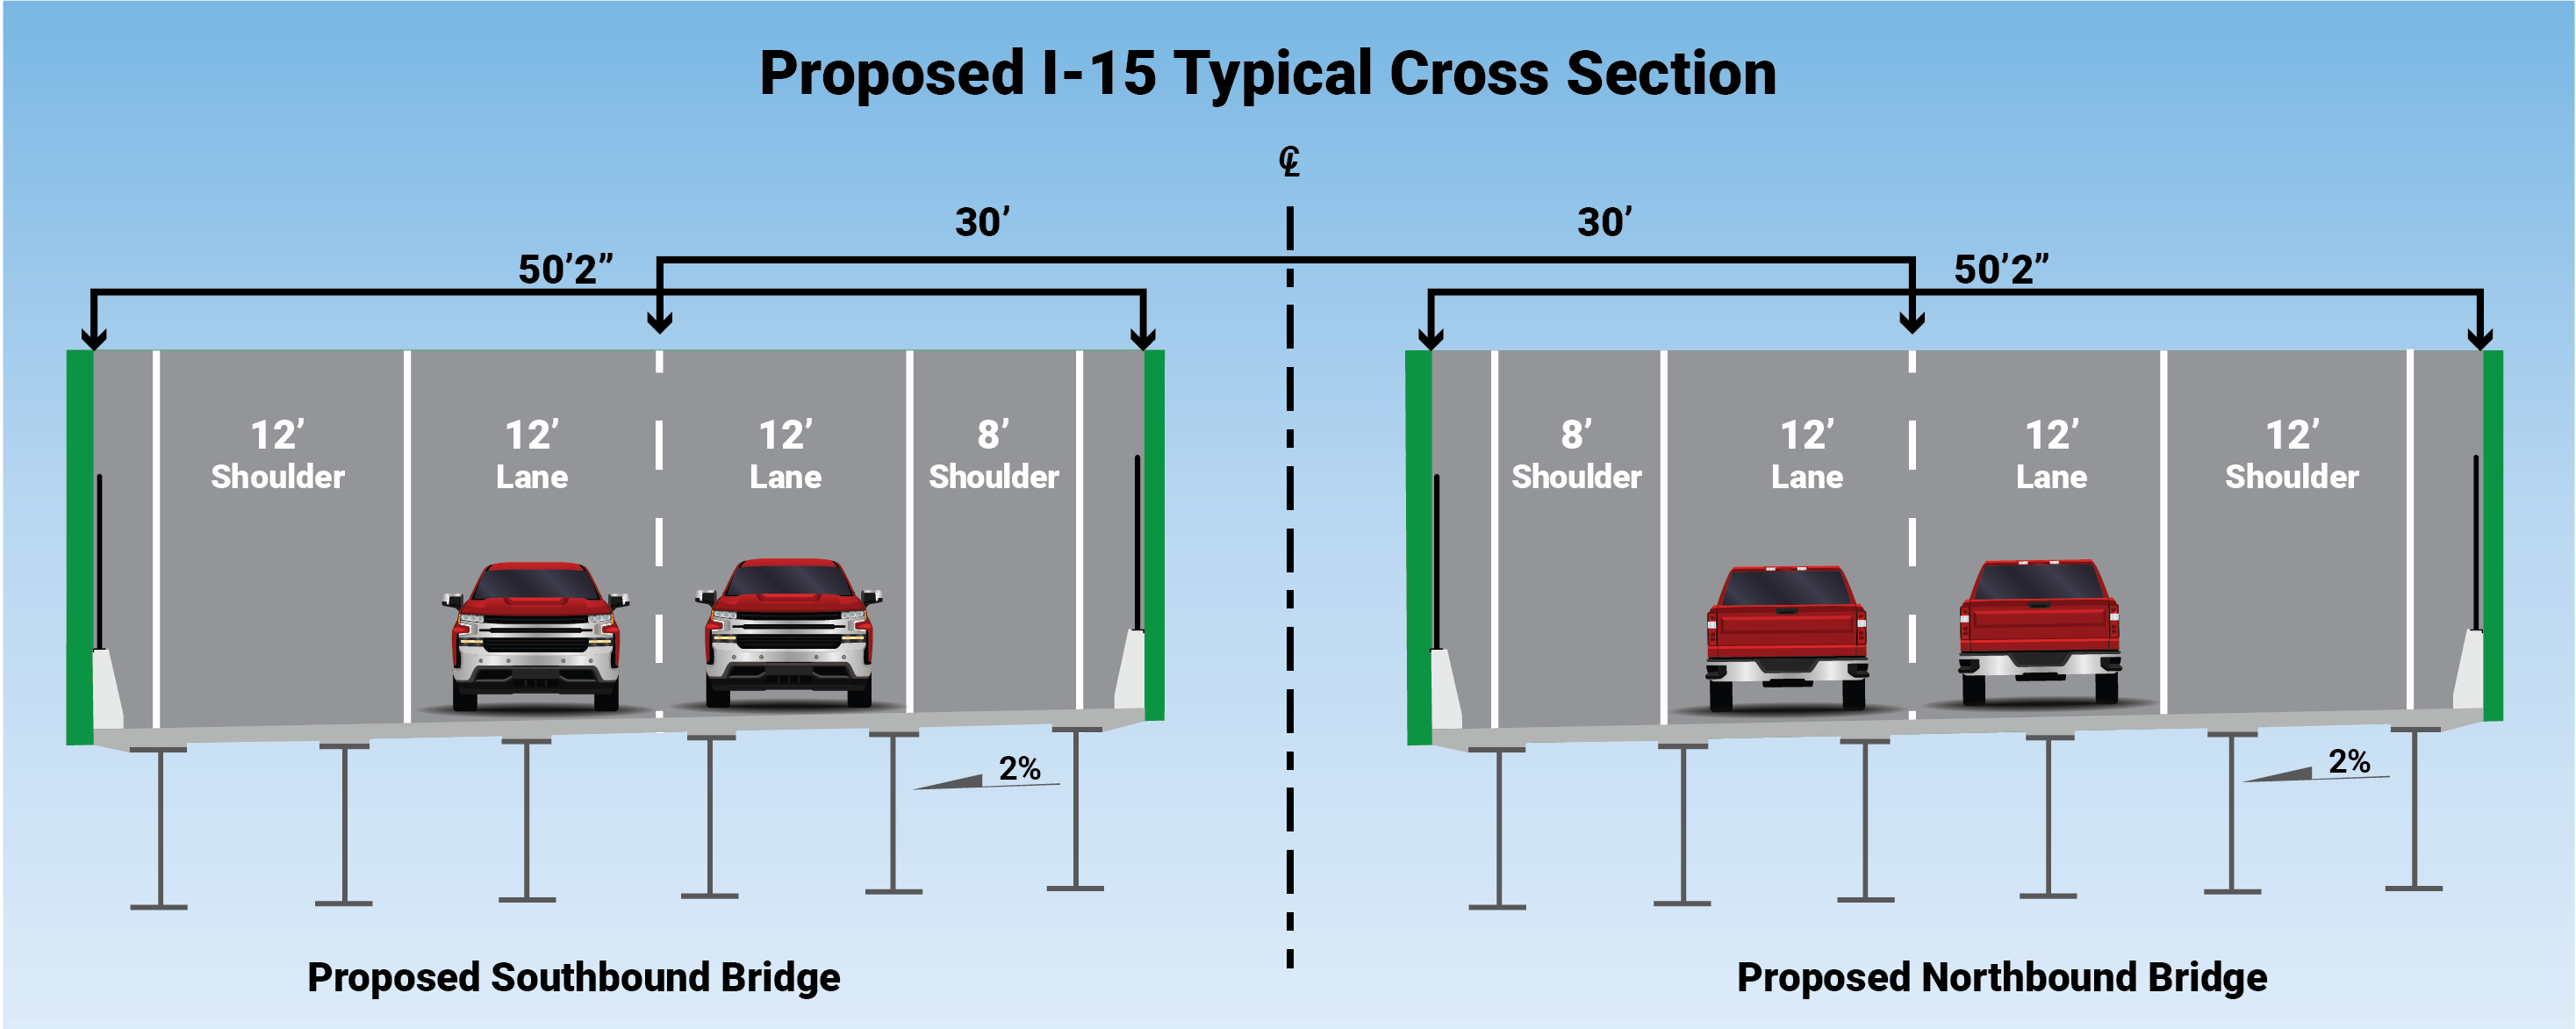 Proposed I-15 Typical Cross sections for Southbound and Northbound bridges. Southbound Bridge includes: 12 foot outside shoulder; two, twelve-foot lanes; 8 foot inside shoulder; and a two percent incline. Northbound Bridge includes: 8 foot inside shoulder; two, twelve-foot lanes; 12 foot outside shoulder and a two percent incline.